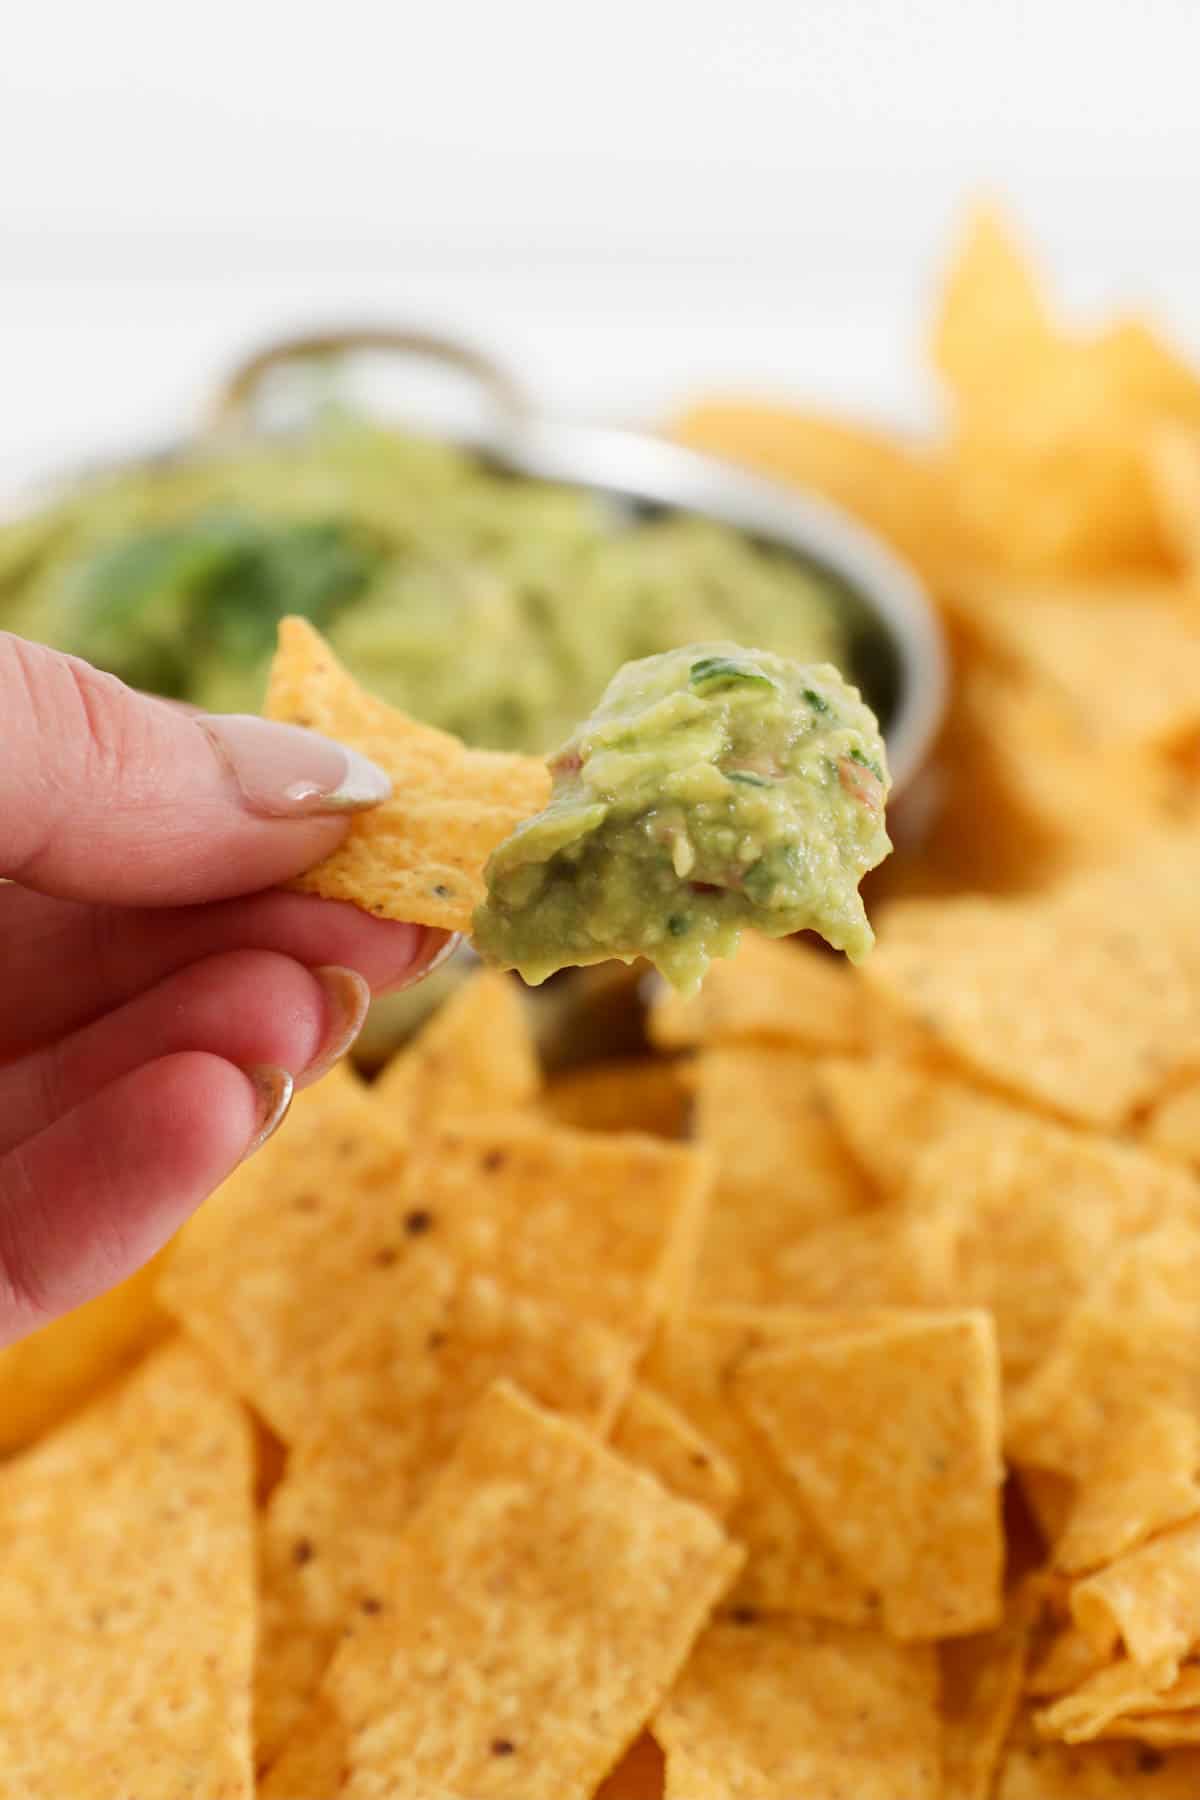 A hand holding a tortilla chip with guacamole.